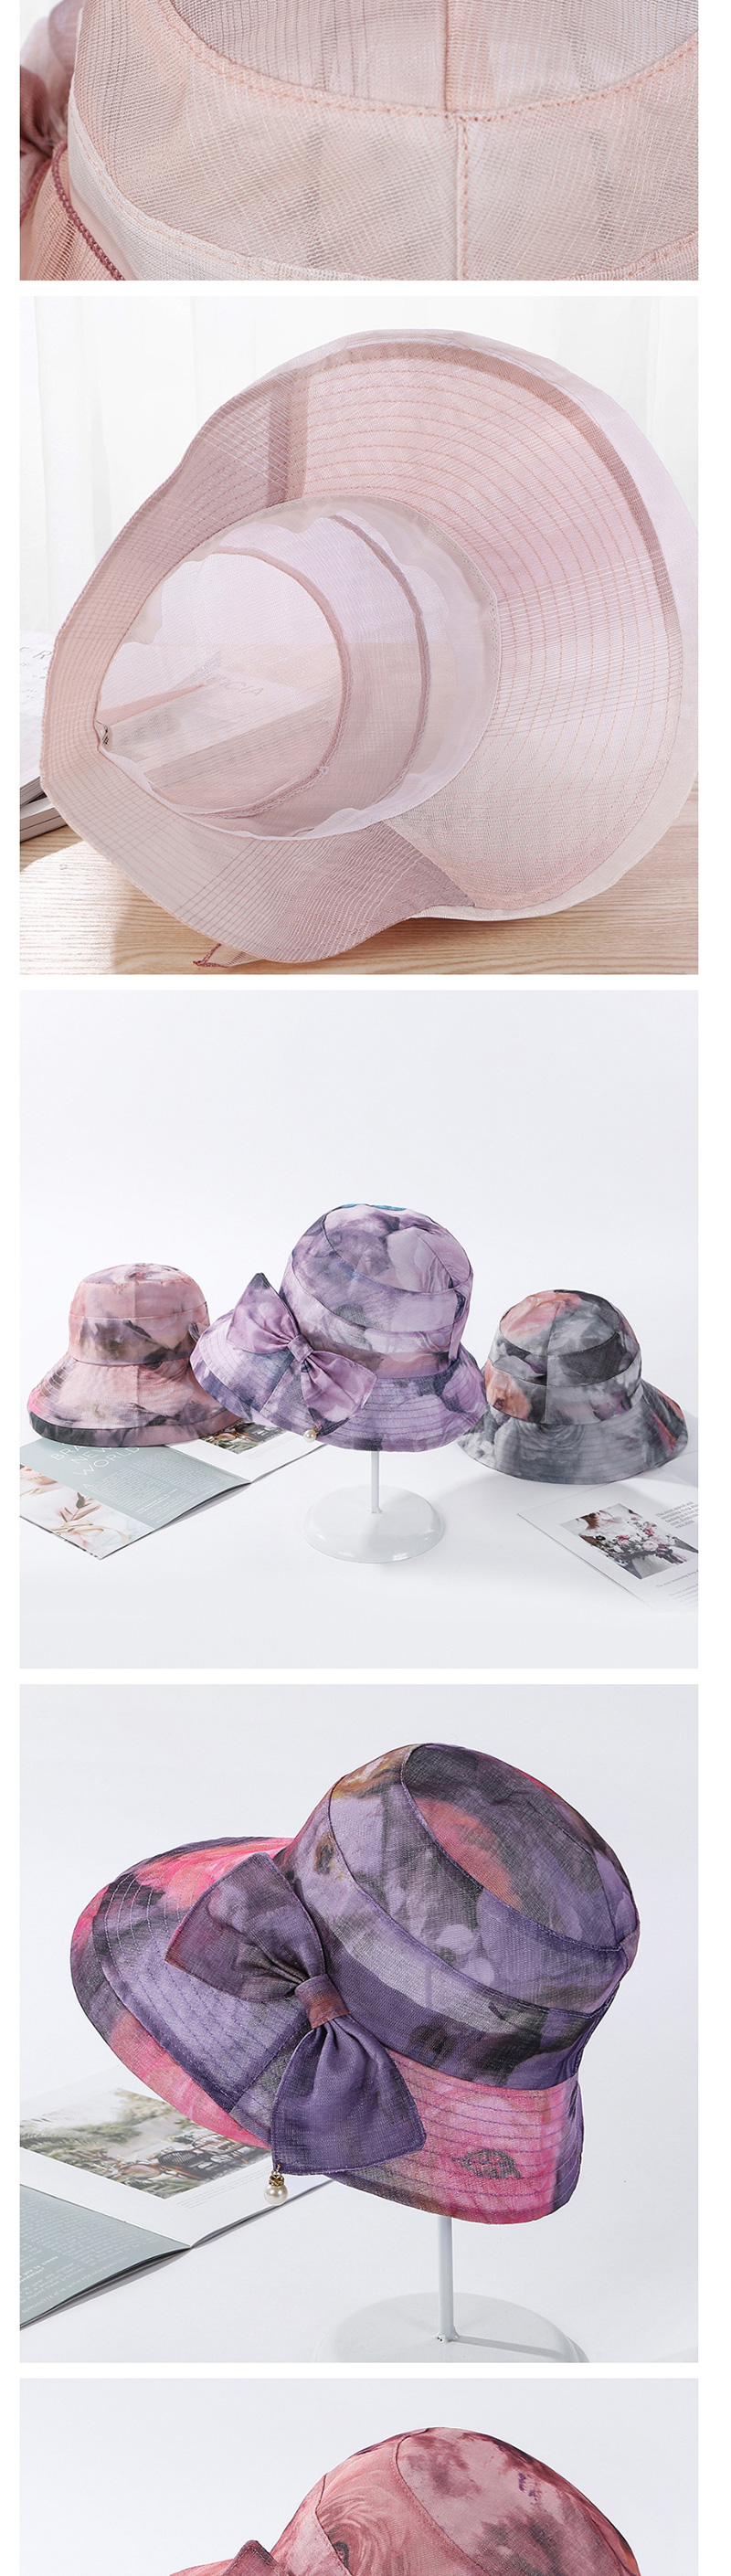 Fashion 9540 Violet Bow-knit Pearl Mesh Contrast Hat,Sun Hats